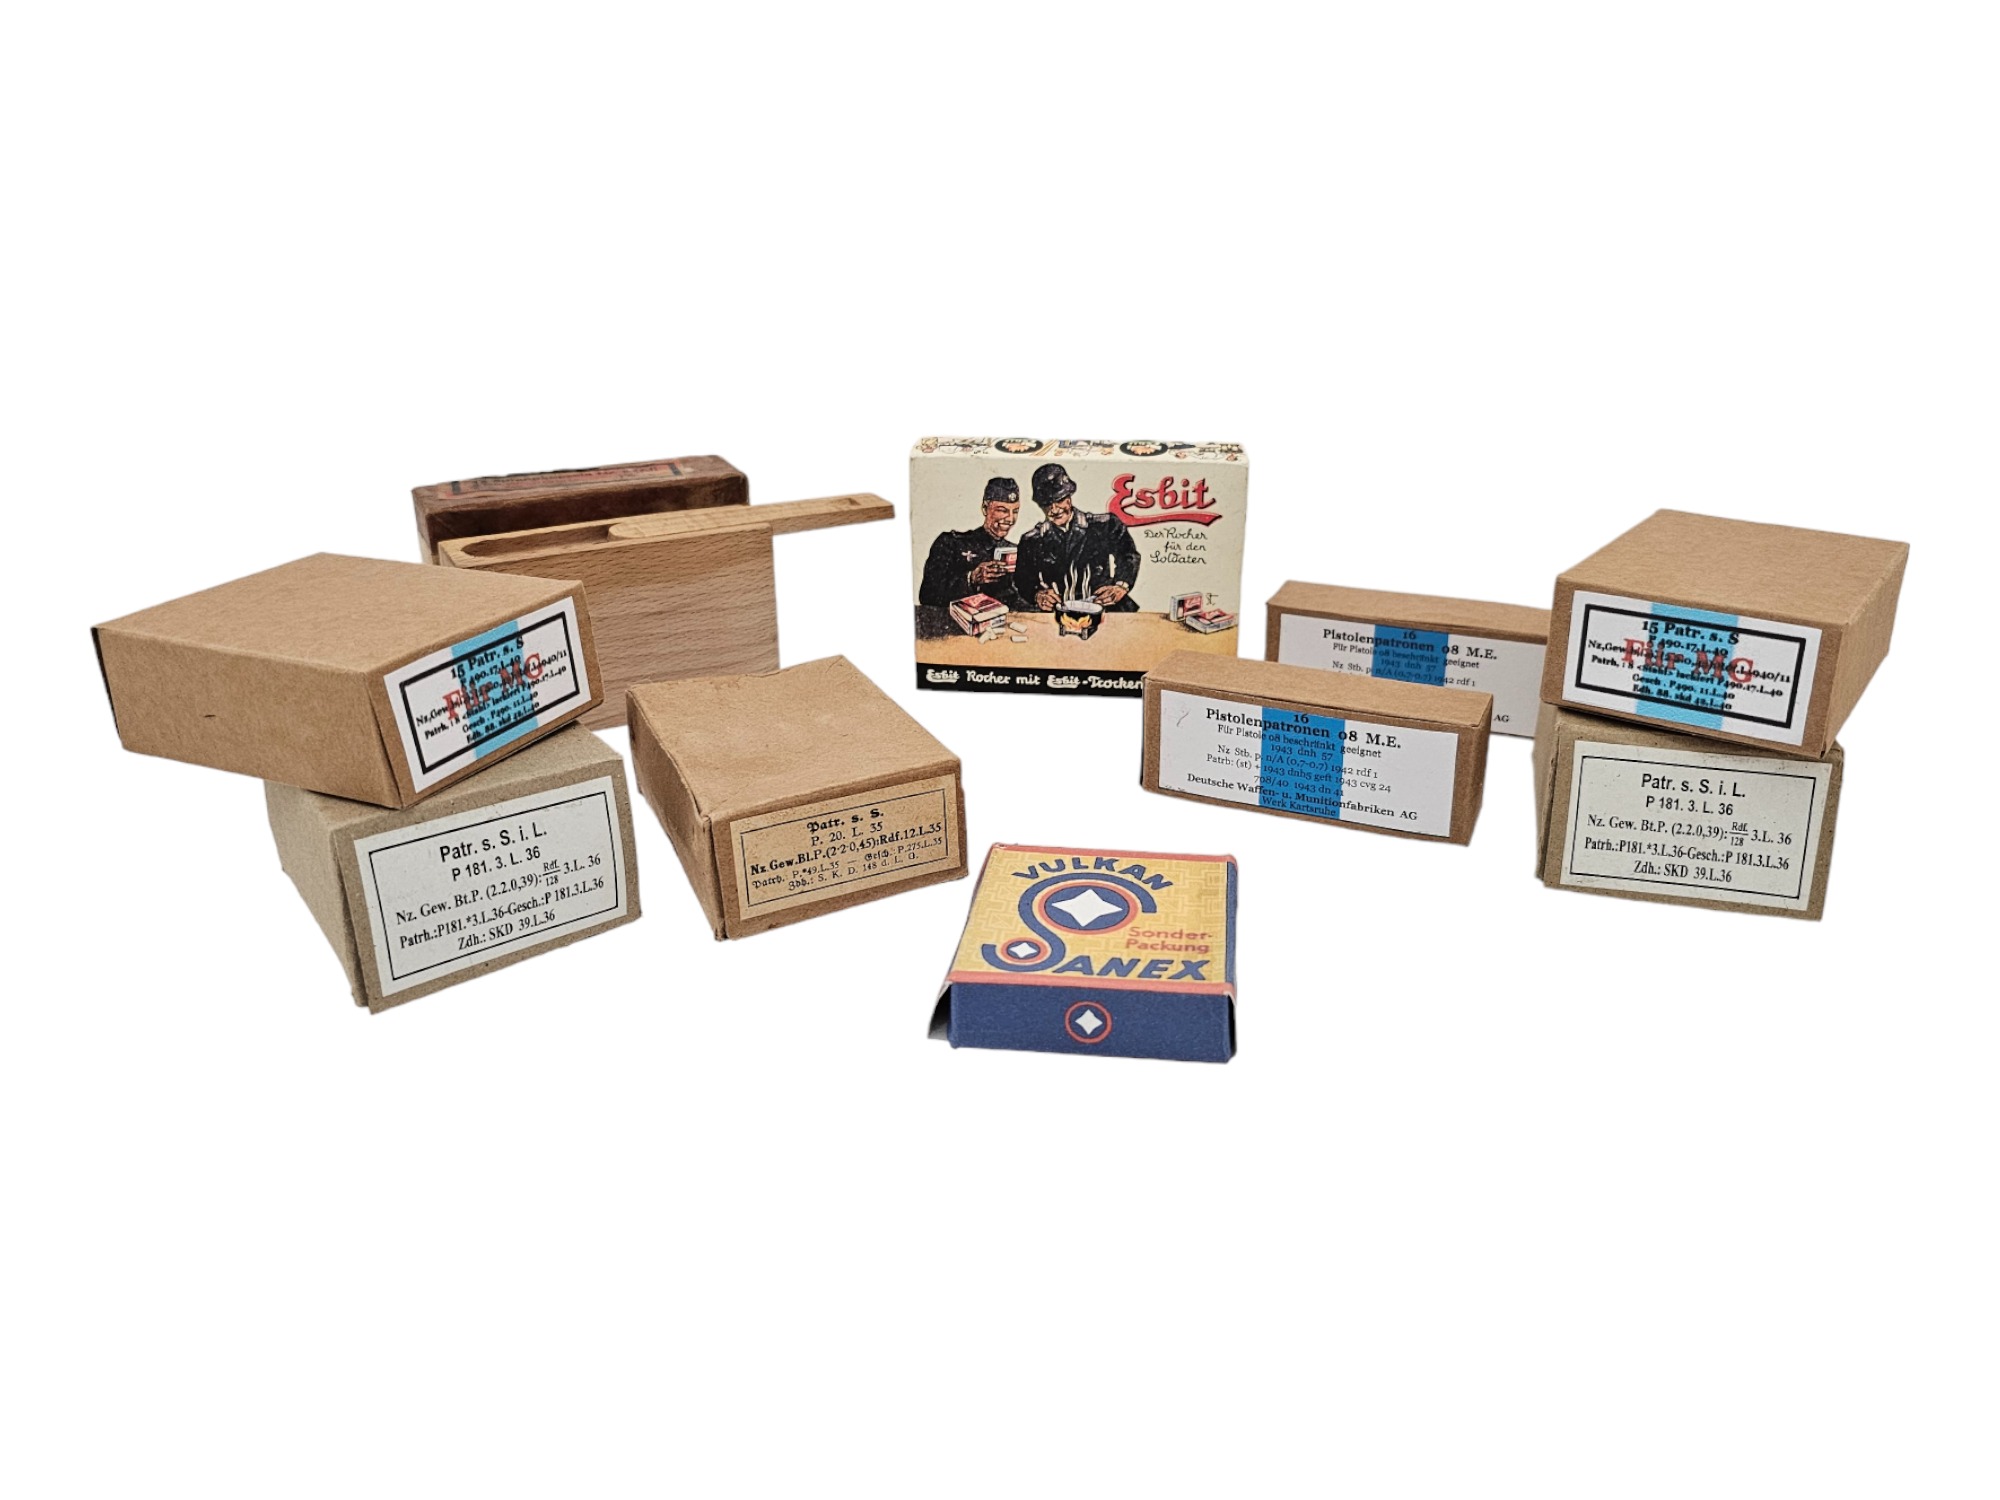 UNUSUAL GROUP OF 10 SMALL WWII NAZI GERMAN BOXES PIC-0